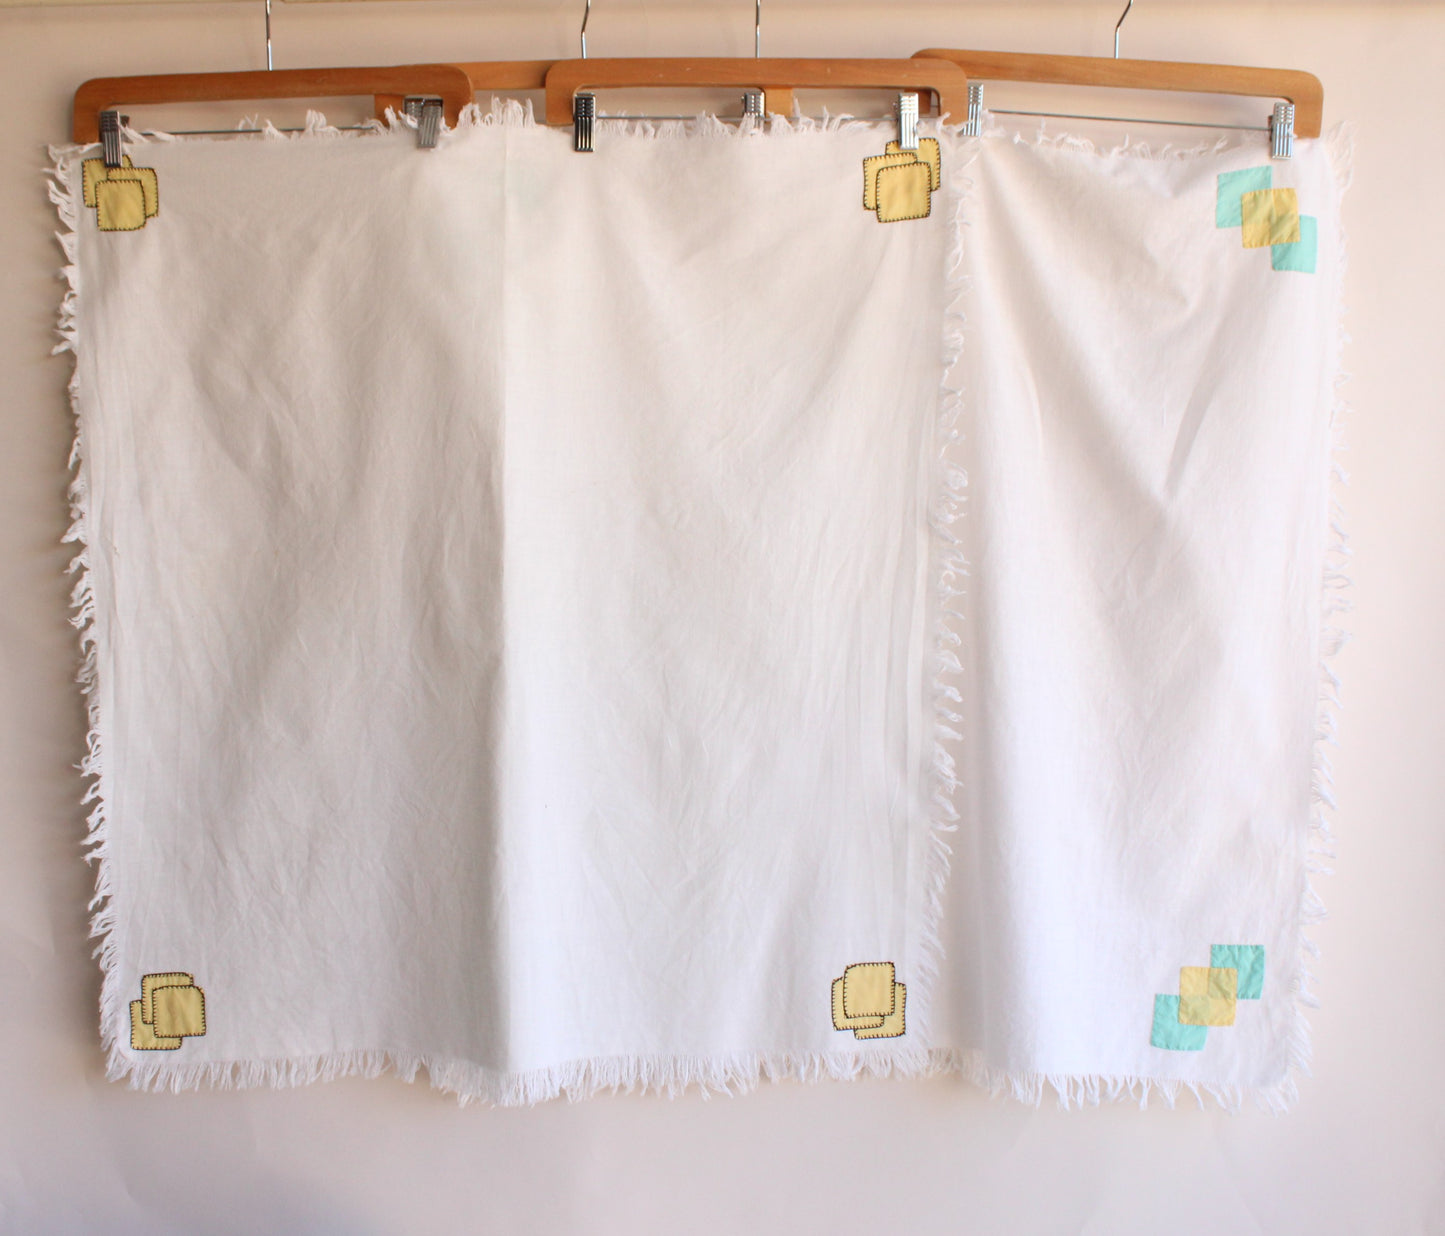 Vintage 1960s Tablecloths Feedsack Cloth With Fringe and Cutwork